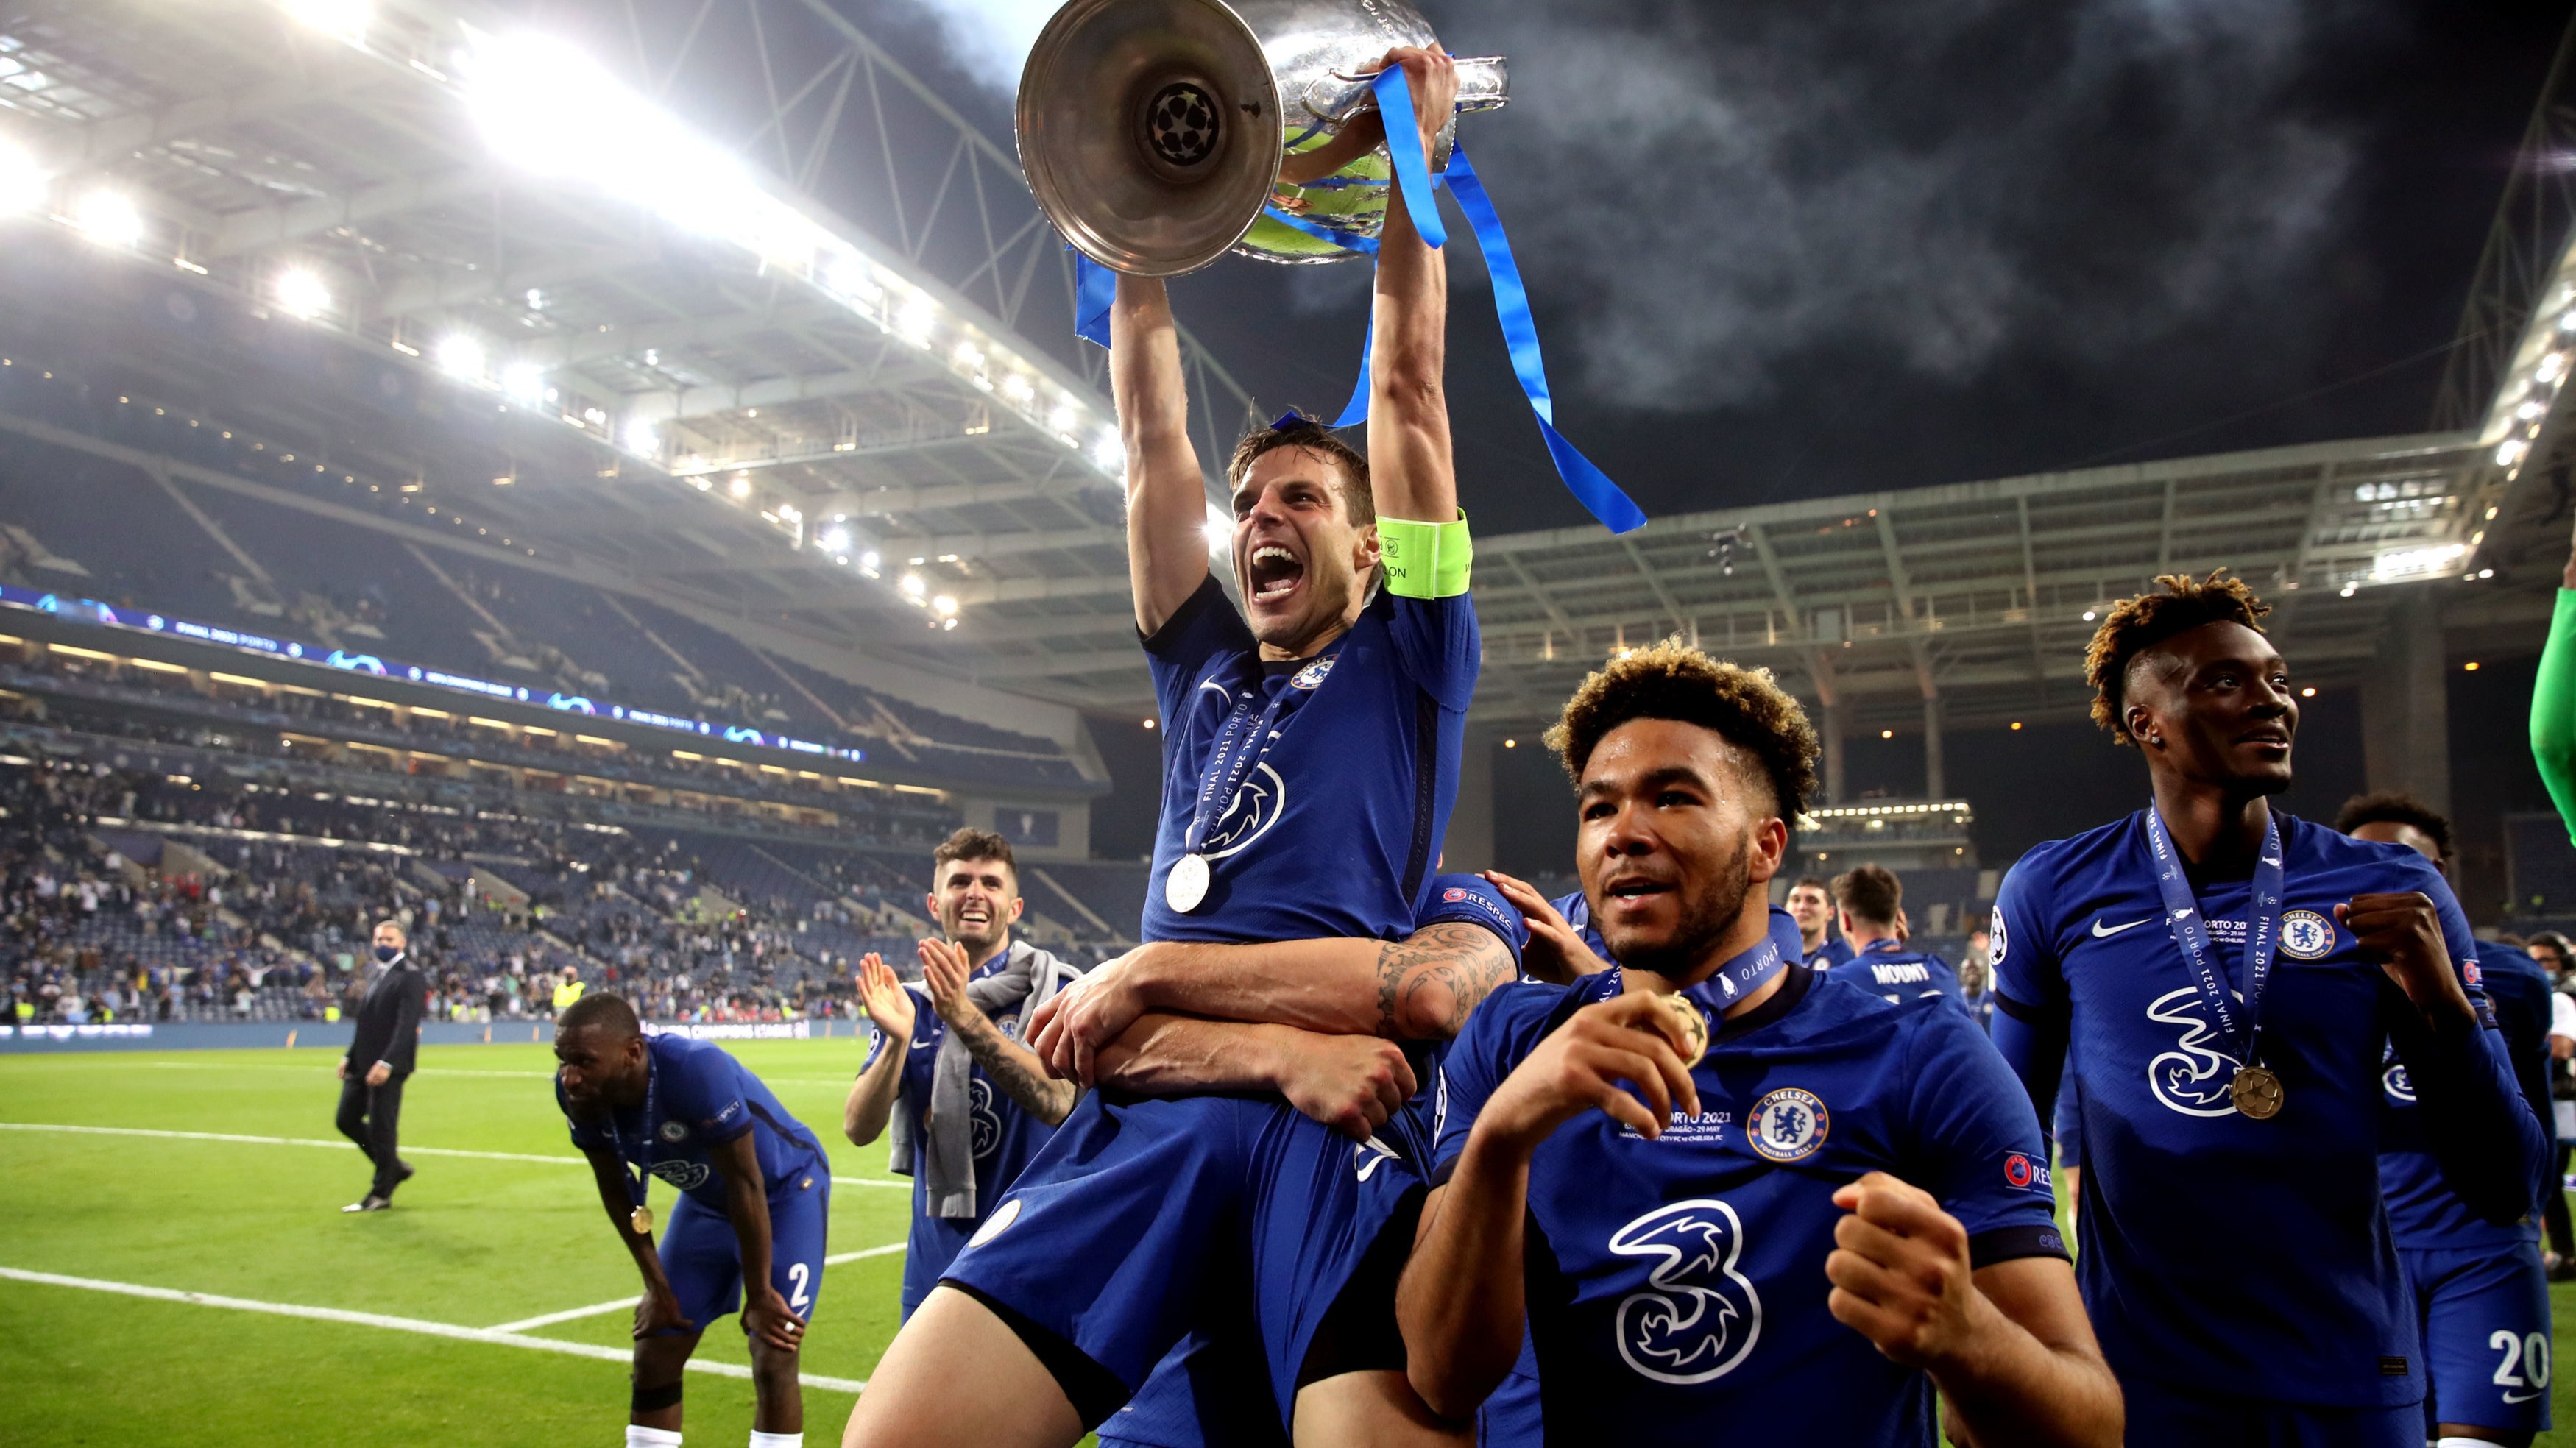 Chelsea FC win second Champions League title after defeating Manchester